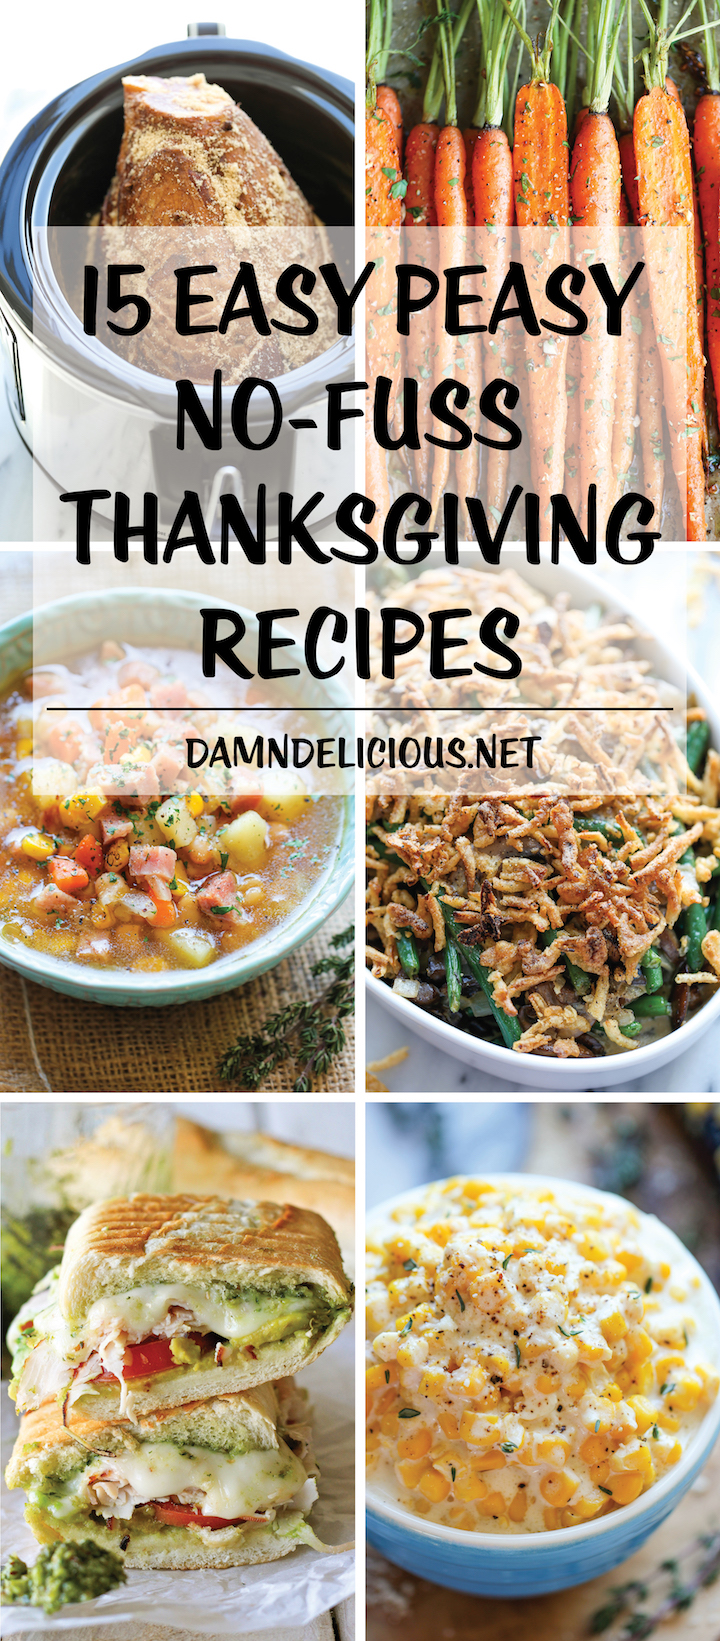 15 Easy Peasy No-Fuss Thanksgiving Recipes - These recipes will make for the best and EASIEST holiday meal. From sides to mains to even using up leftovers!